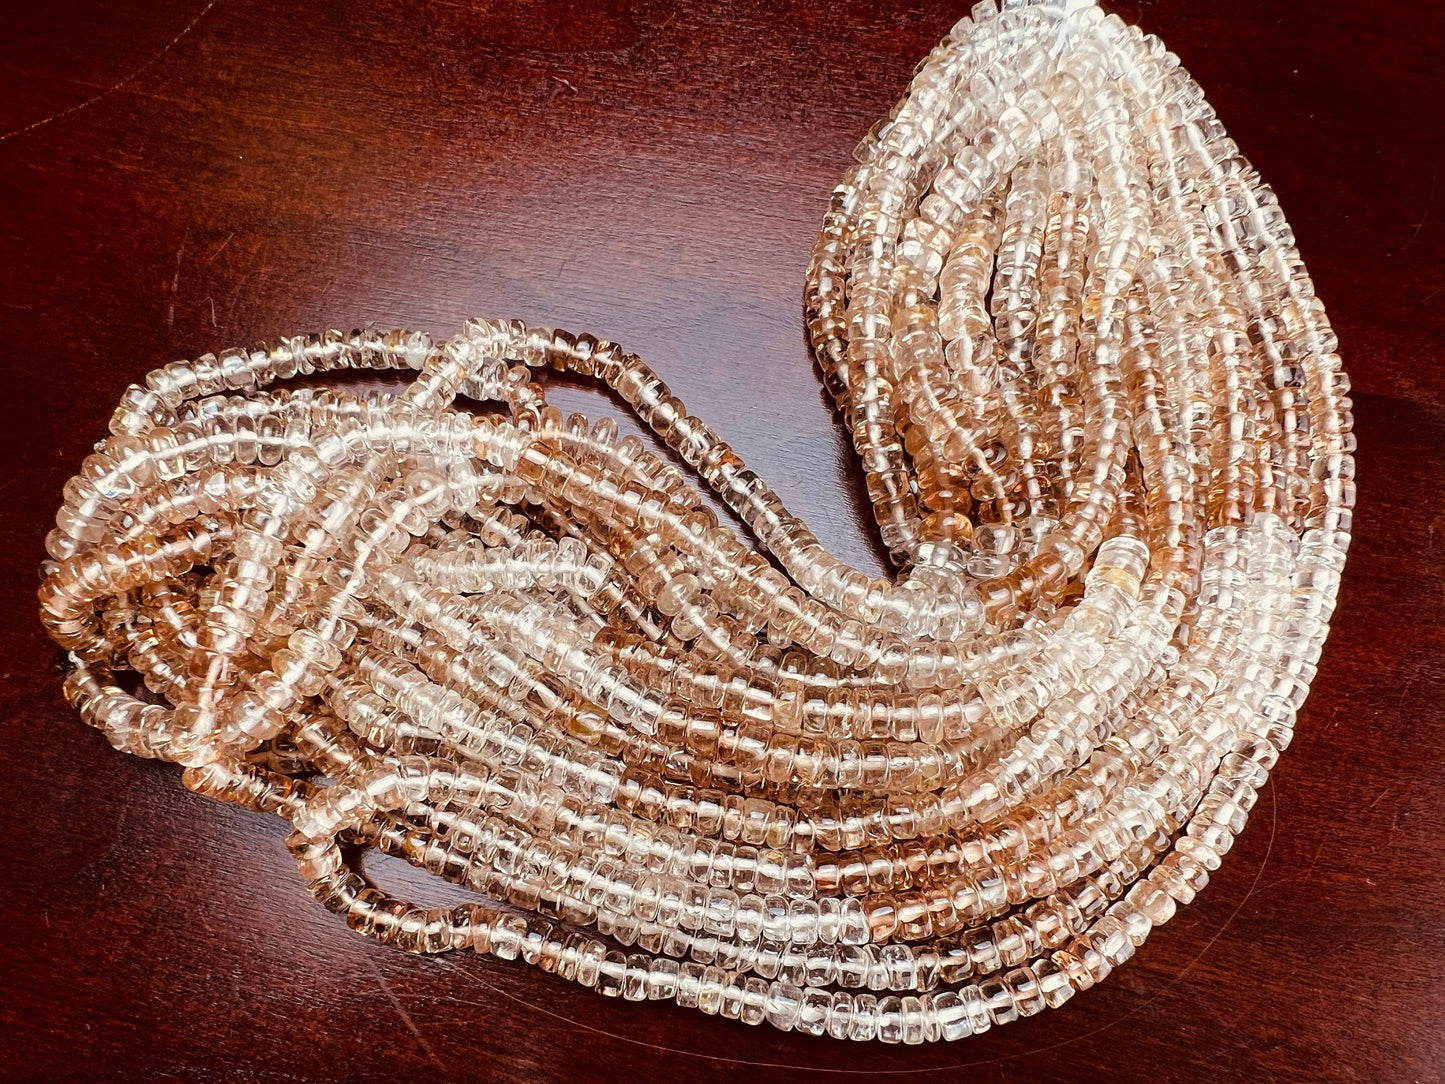 Imperial Topaz Smooth Heishi Roundel 4.5-6.5mm brown Shaded Natural gemstone beads Jewelry Making, 8” and 16” strand